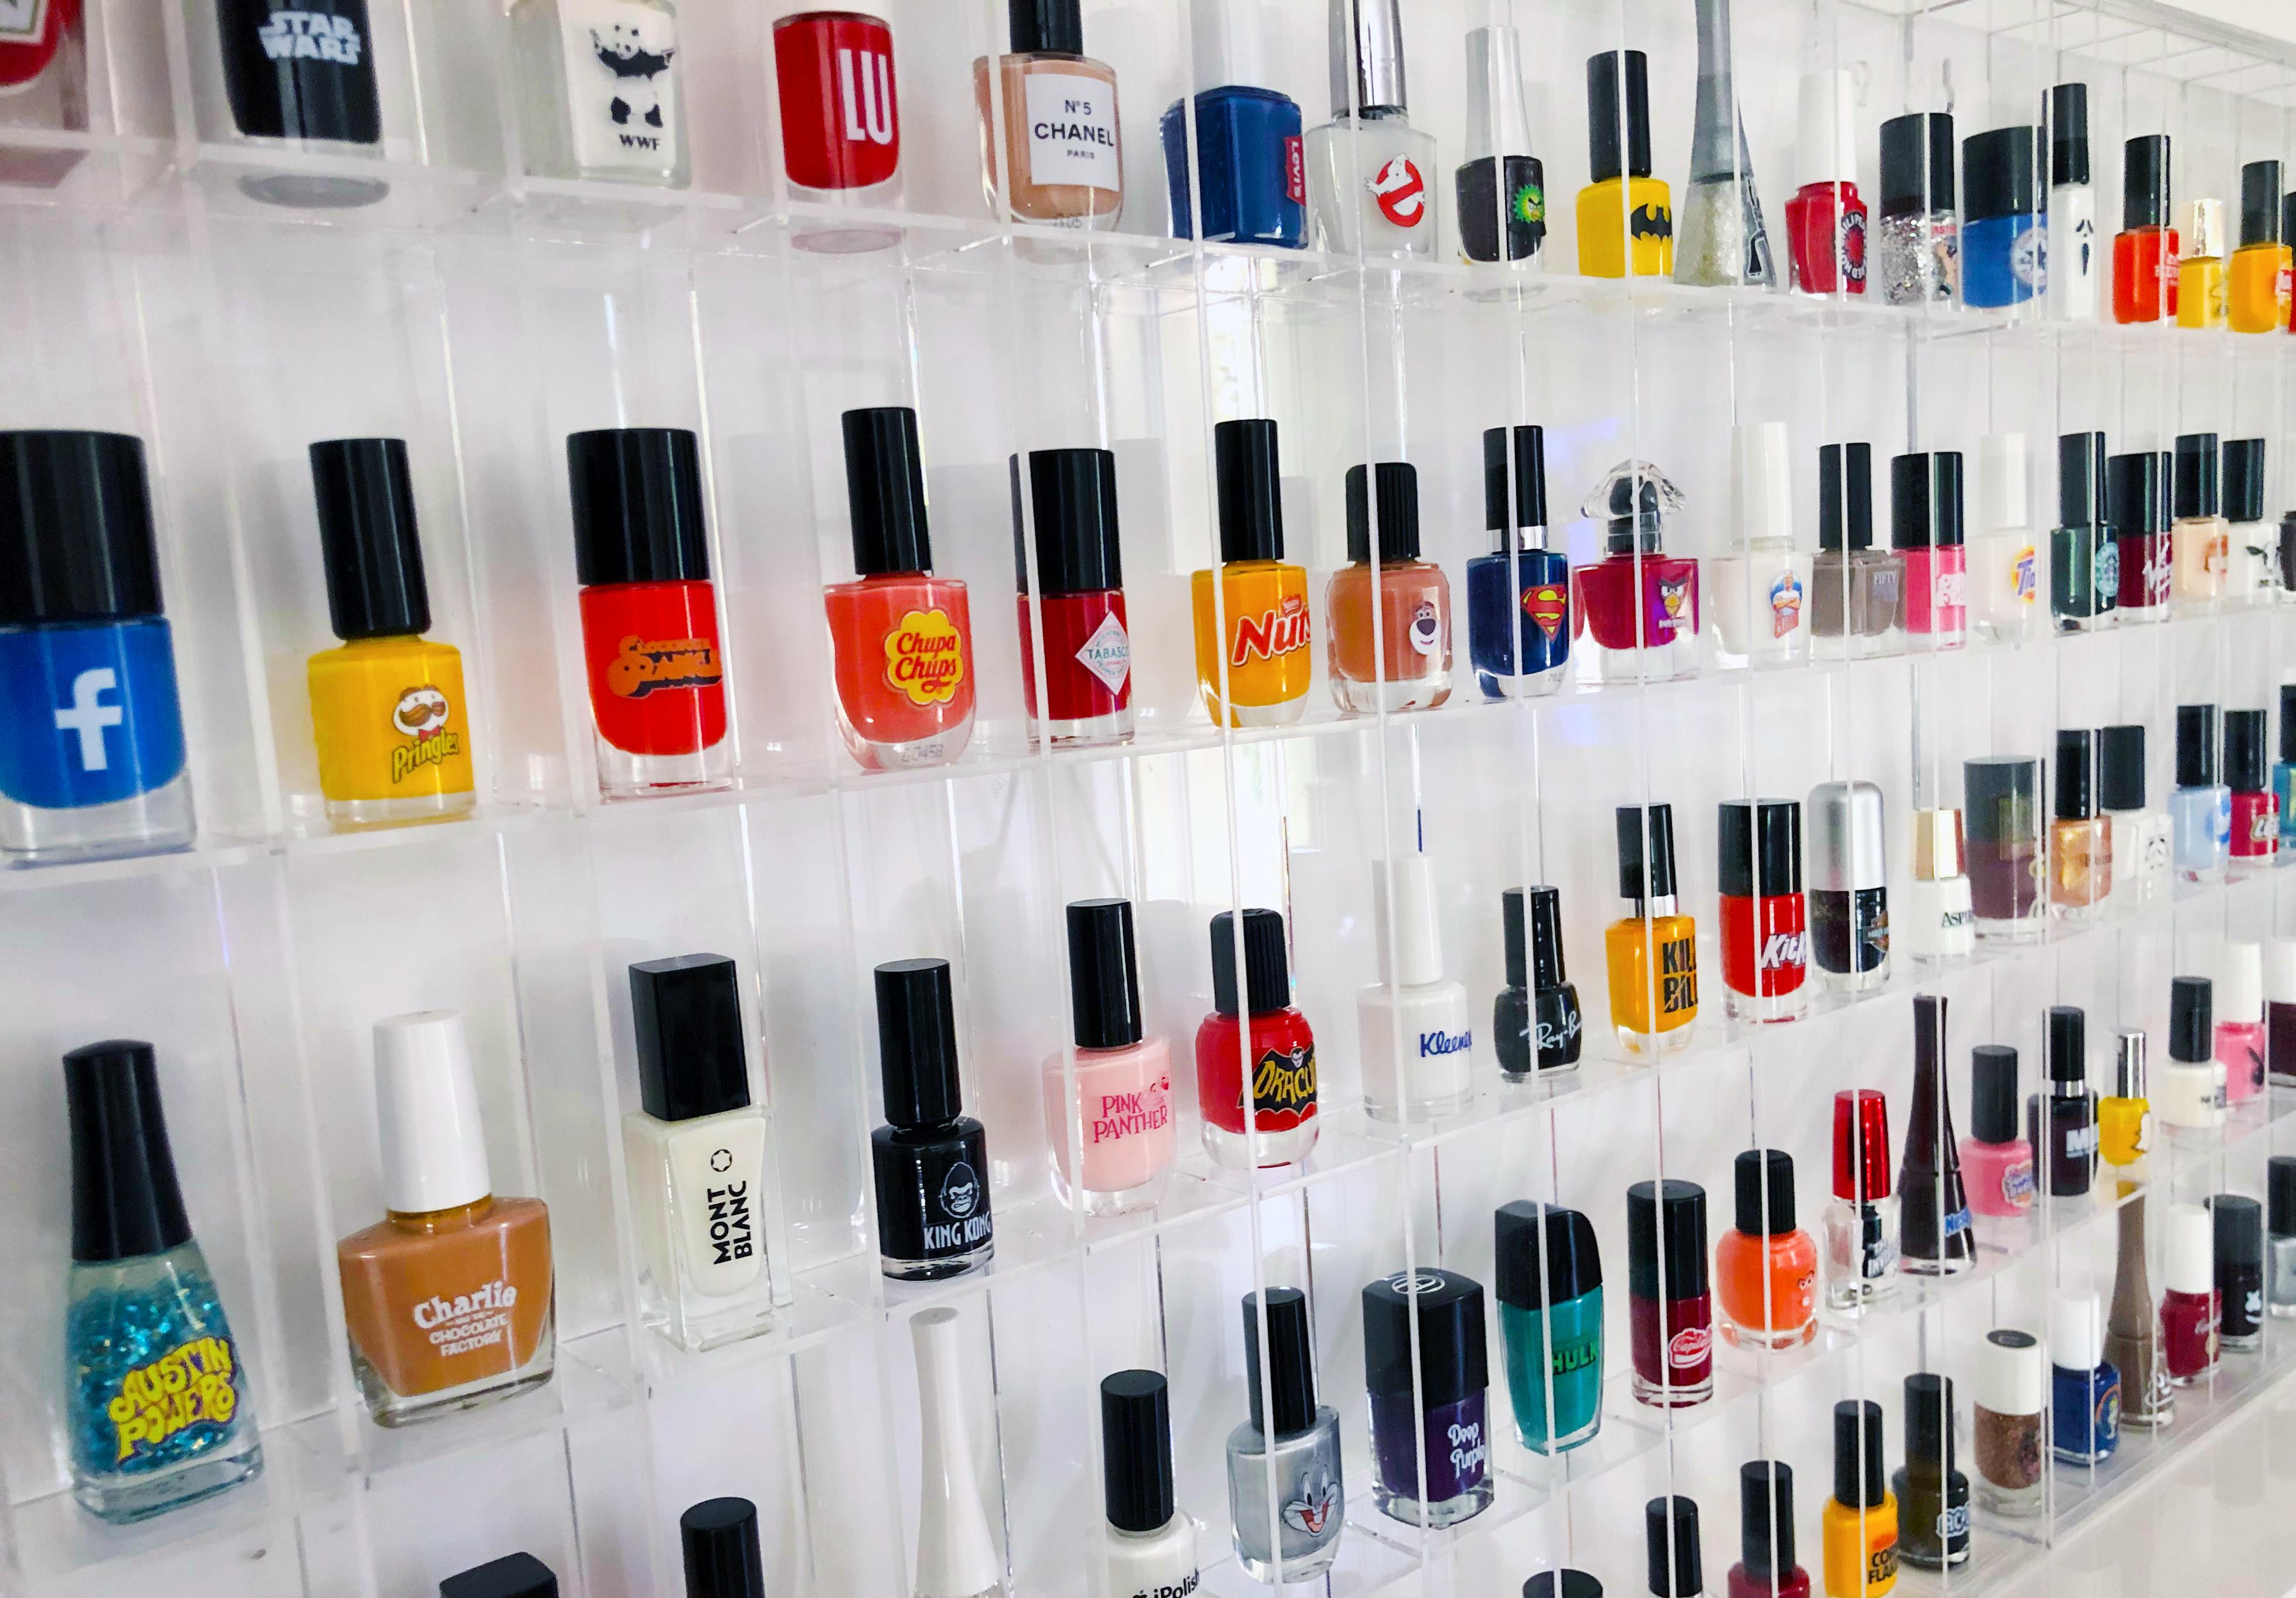 This seemingly simple arrangement of sculptural nail polish shaped bottles grows in detail the longer you look. Each bottle is branded with instantly recognizable images and logos, and carefully arranged as both an homage and criticism of nostalgic